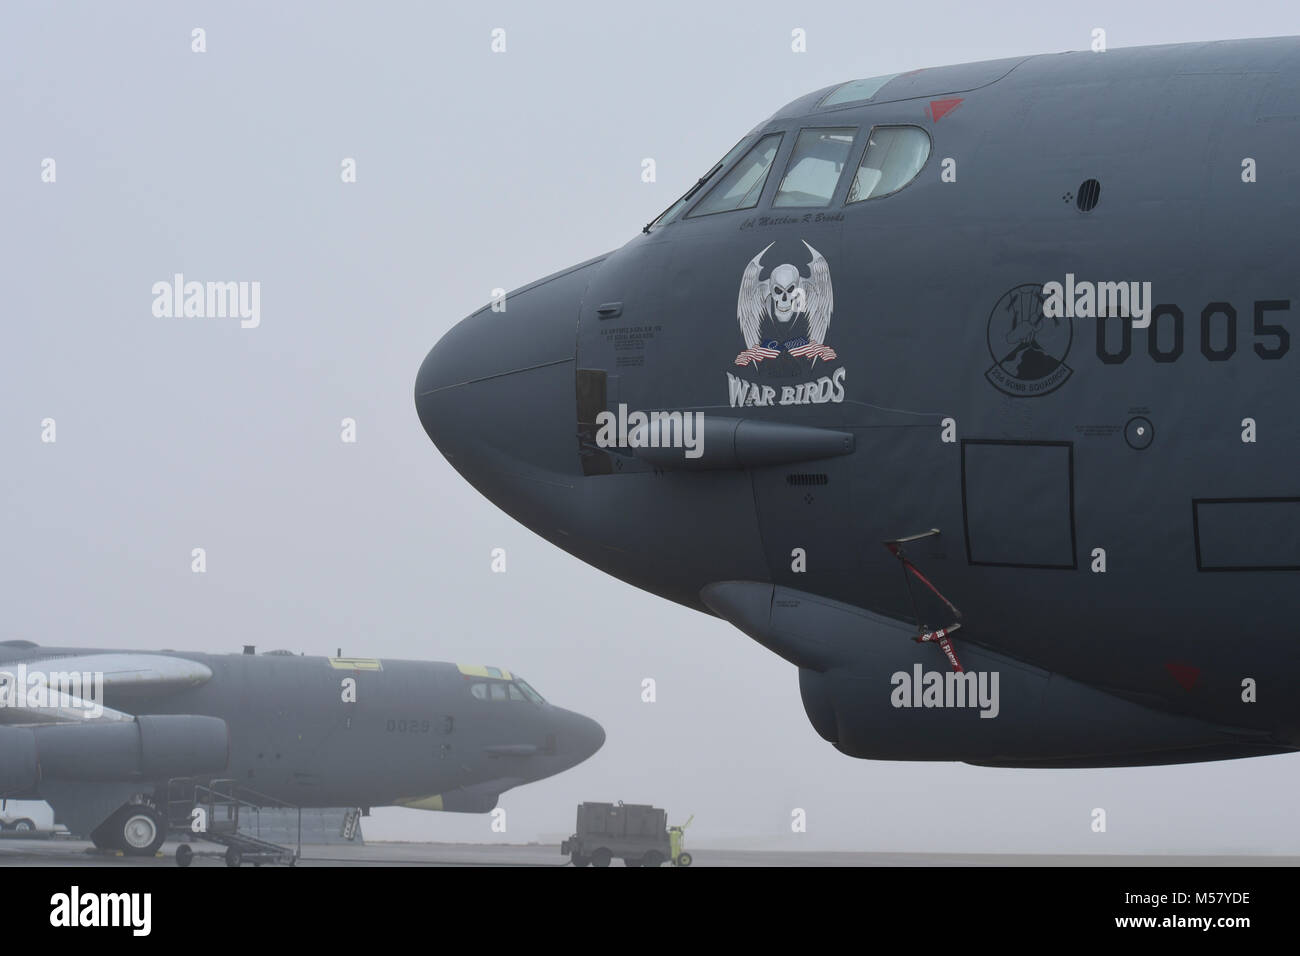 Two Boeing B-52H Stratofortress aircraft undergoing maintenance, repair and overhaul at the Oklahoma City Air Logistics Complex, are shown in foggy conditions during the morning of Feb. 14, 2018, Tinker Air Force Base, Oklahoma. OC-ALC is a subordinate unit of the Air Force Sustainment Center and is the complex responsible for bomber, tanker and jet engine maintenance. (U.S. Air Force photo/Greg L. Davis) Stock Photo